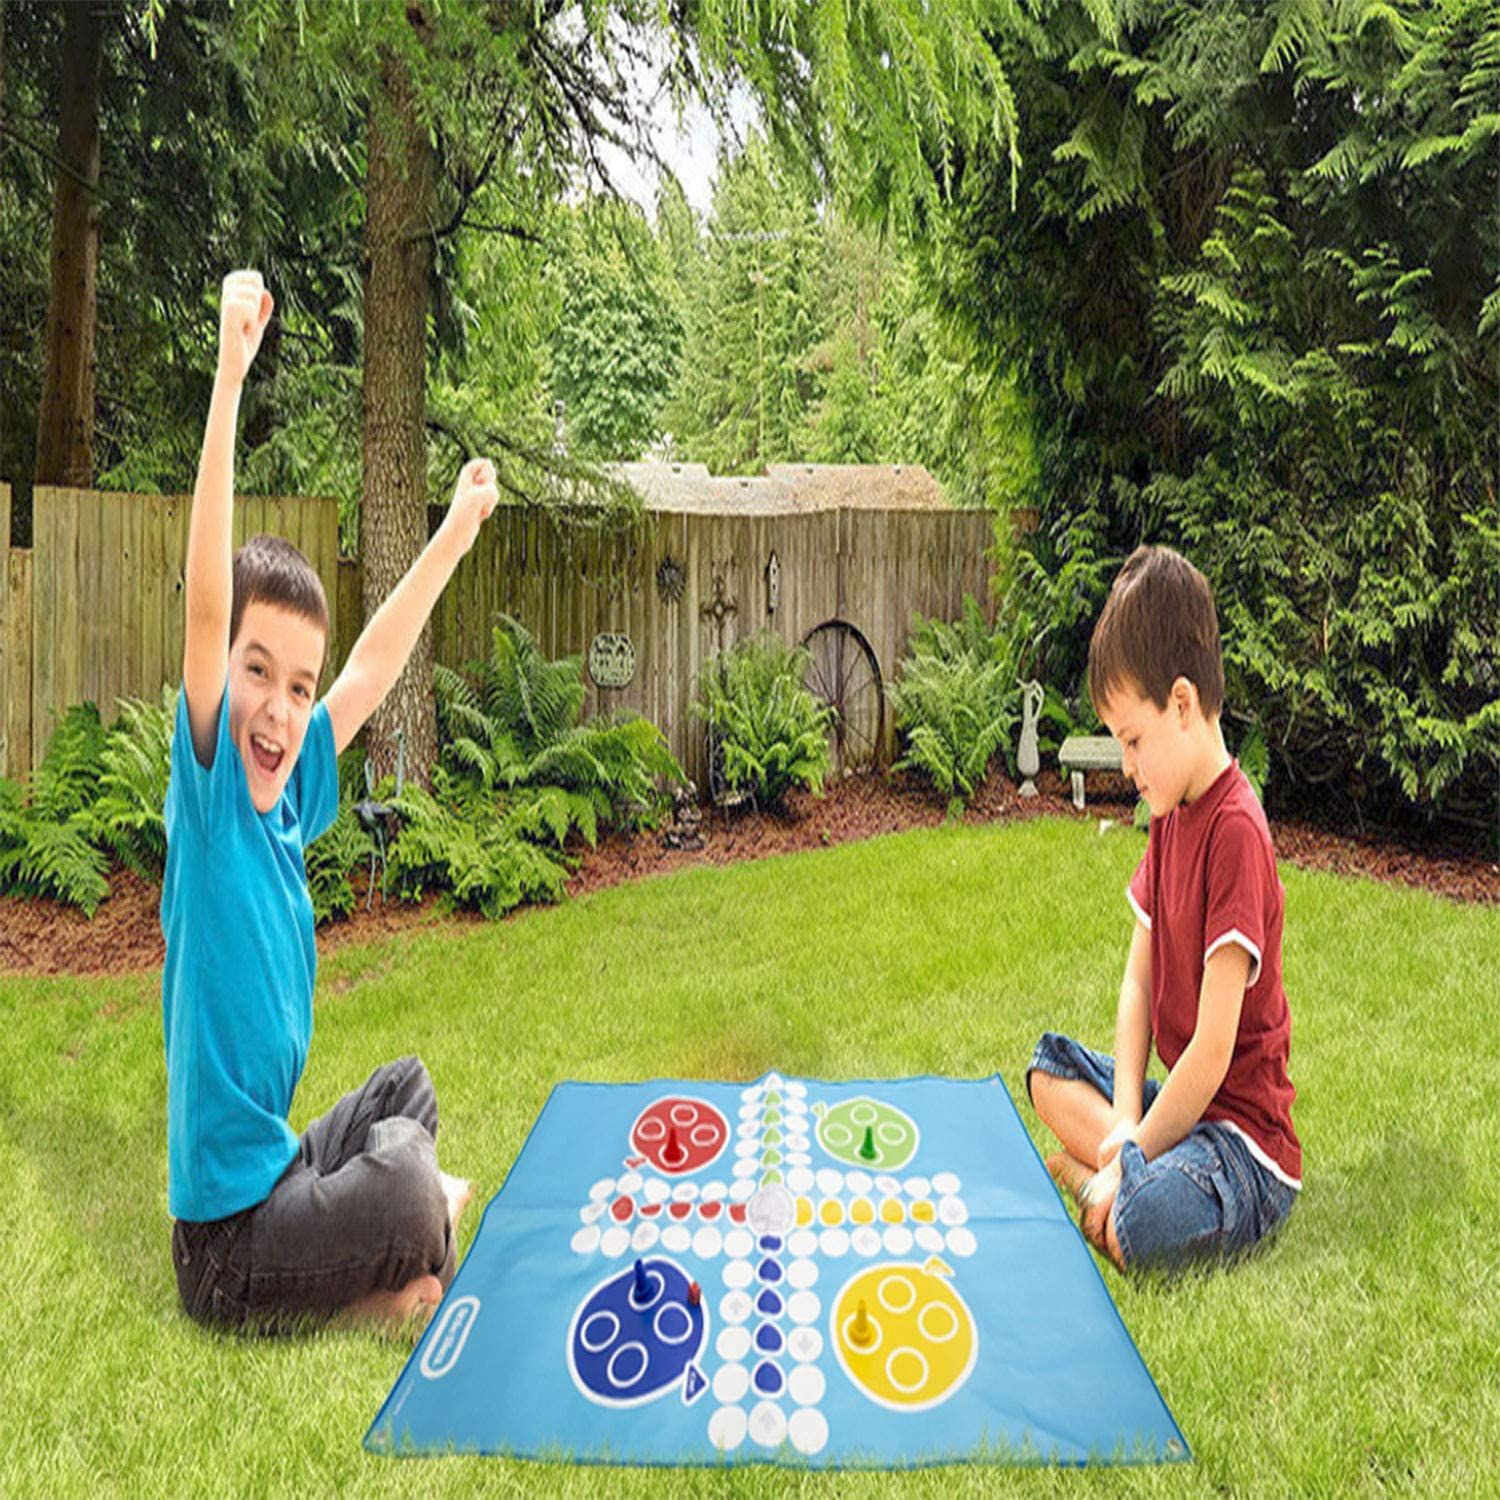 Enjoy hours of fun playing classic games with a twist with this brilliant Giant size Ludo Game. Includes: Ludo playmat Dice 16 plastic counters 4 ground pegs Instructions This brilliant giant size set is great for both indoor and outdoor fun for your youngsters to love. Product Information: Ludo Game Giant size Outdoor/indoor fun Playmat measures: 95cm x 138cm Ages 5+ 

    GIANT LUDO SET: Little tikes novelty giant ludo set, With large play mat and oversized counters this set is perfect for teaching your children this classic game. Play this classic family game anywhere, from the garden, beach and even parties. Can also be played indoors.
    CLASSIC GAMES: Set up your counters on the giant playing mat and roll the dice. Move all your counters into the safe zone to be crowned the winner. Assists in the development of basic skills and tactical thinking whilst playing the game. A twist on a classic play mat game, this giant version of the traditional Ludo will be fun for the whole family.
    MATERIAL: The giant garden games are made from good quality materials. Children can physically move around this plastic play mat. This play mat enables your children to play board games outside.
    EASY TO SET UP & PUT AWAY: When it comes to games for kids, teens, and adults. Little tikes ultimate is easy to set up and easy to clean up. When you're done playing, it's easy to fold and pack, ready to bring to your next gathering.